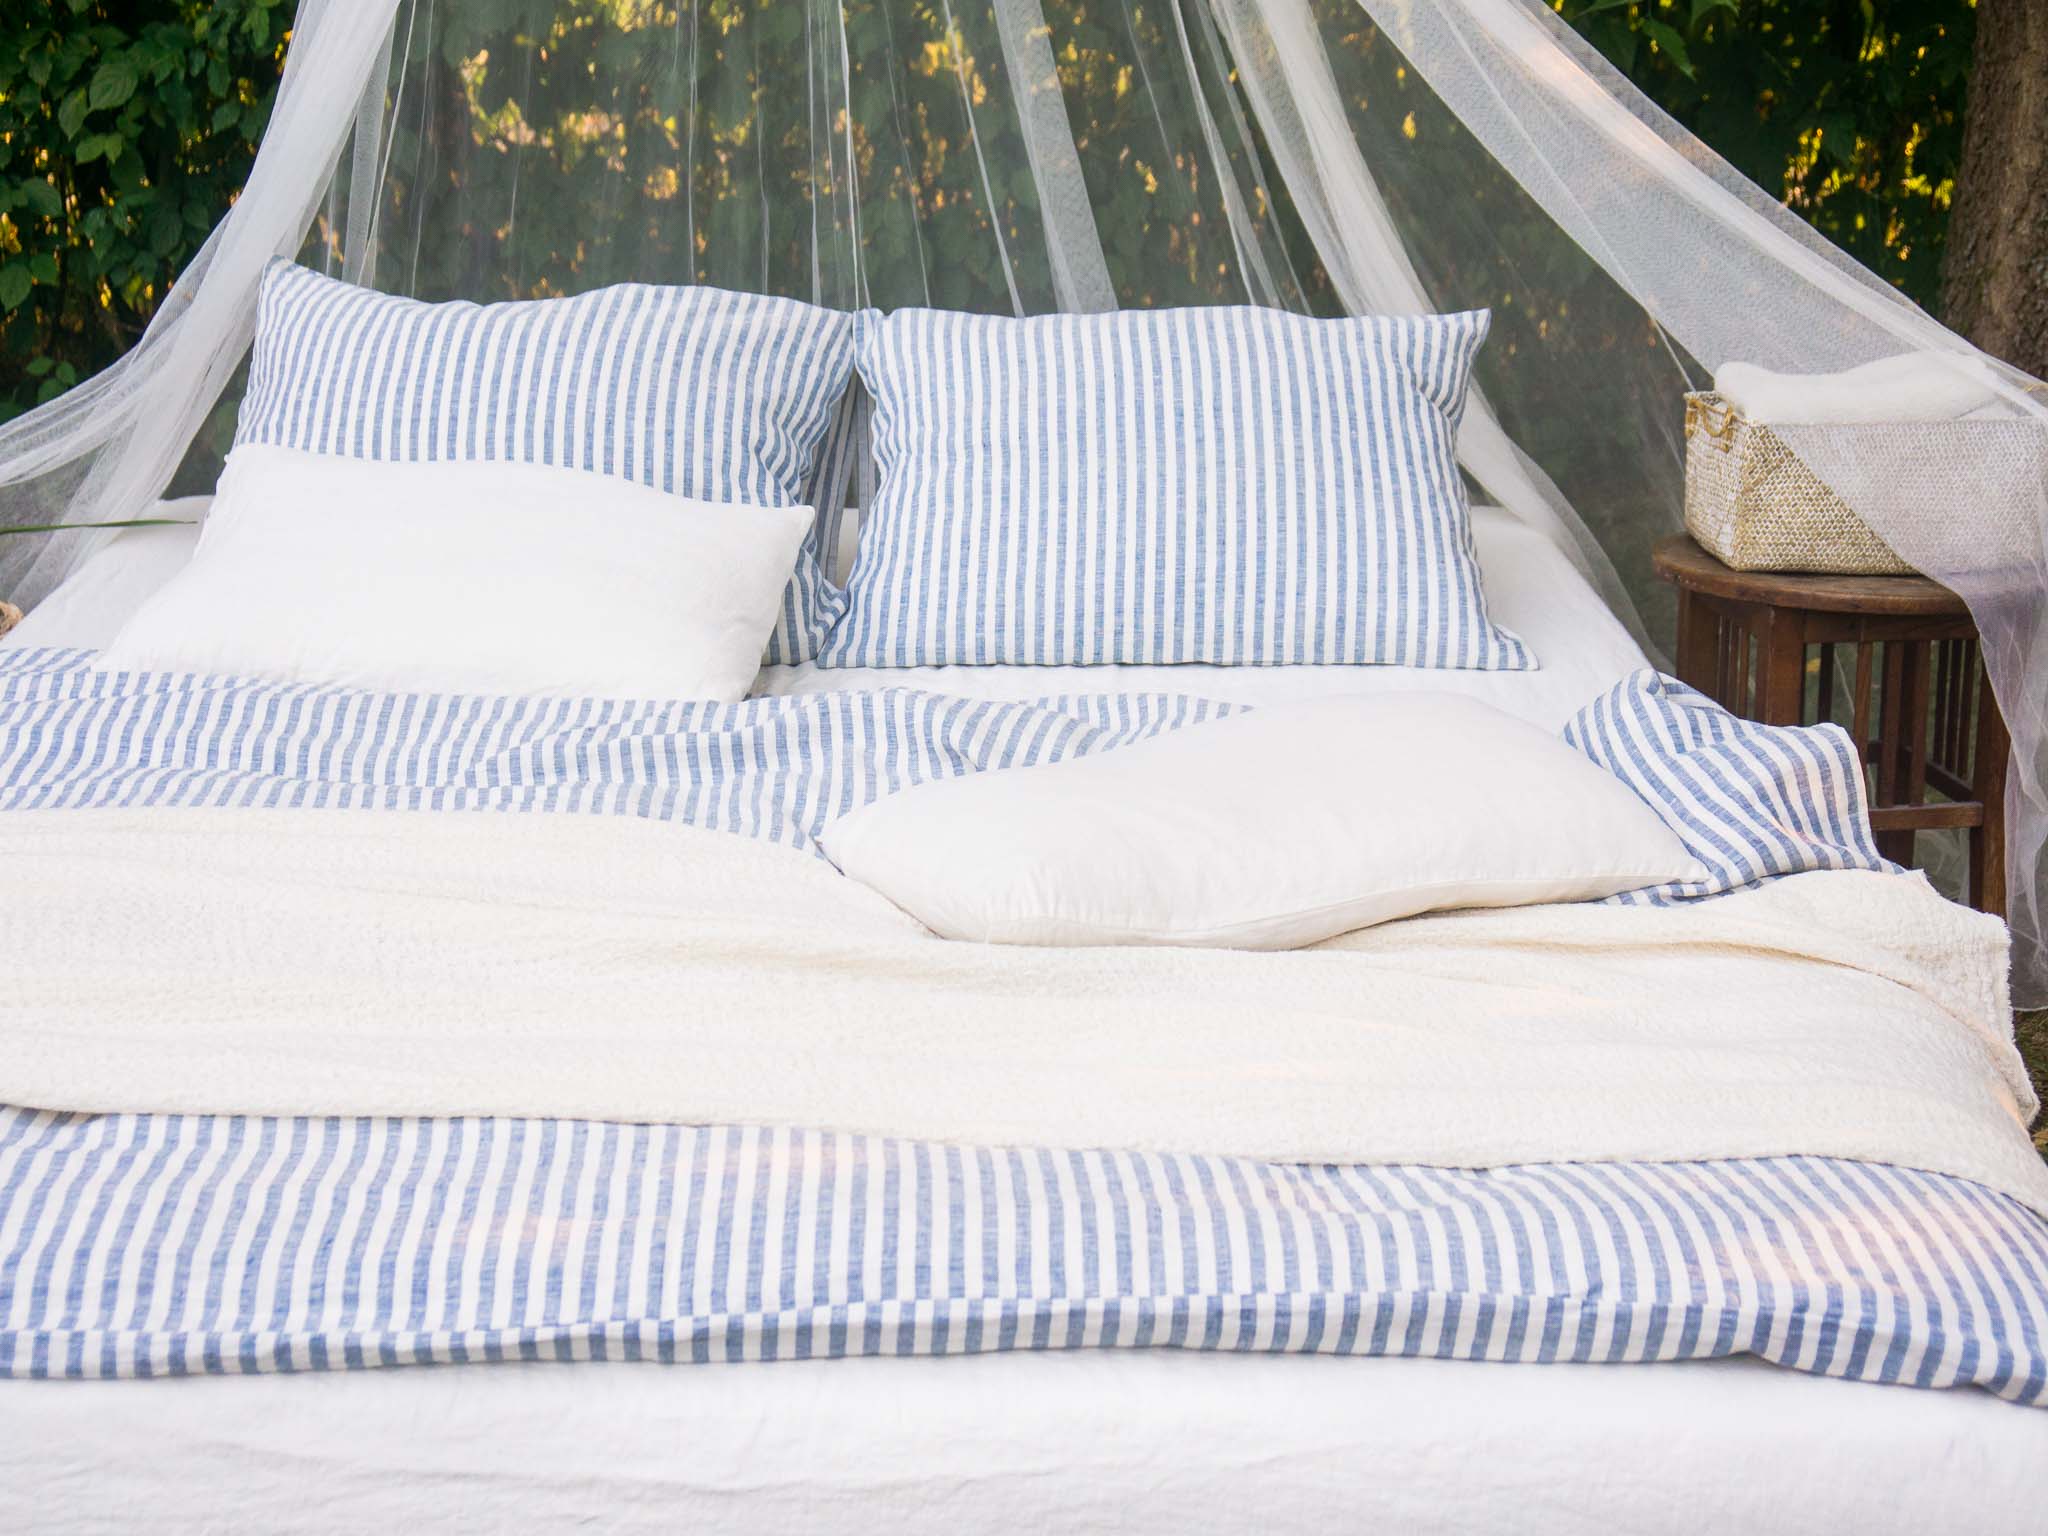 Linen Sheets - Outdoor setting - Riviera Bedding - White and Blue